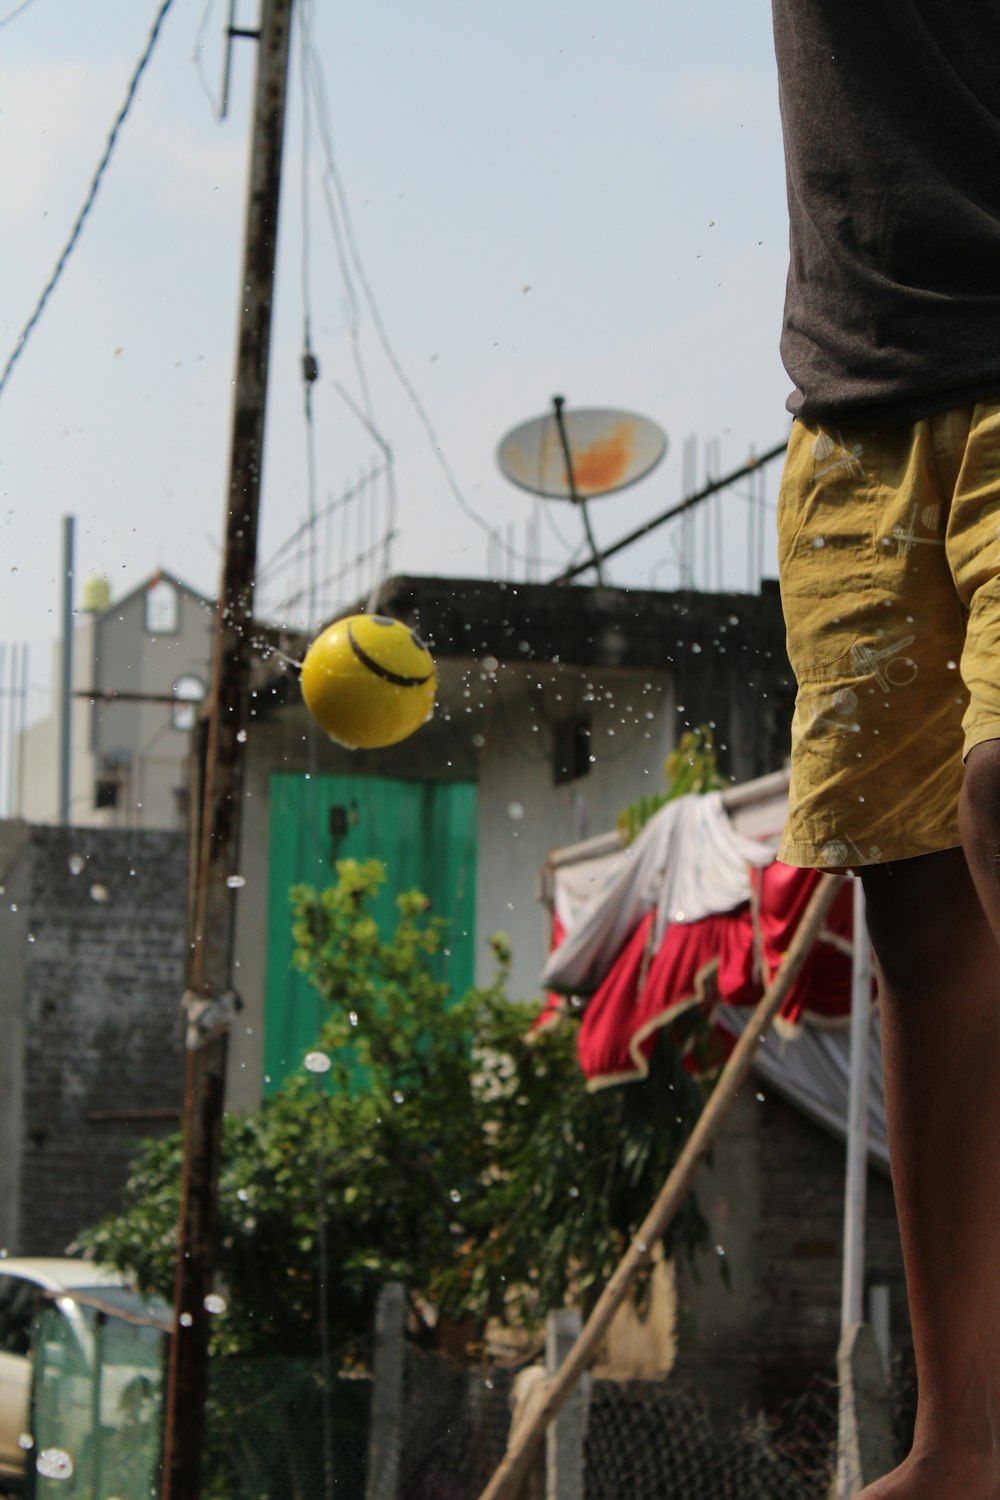 a person is playing with a yellow ball